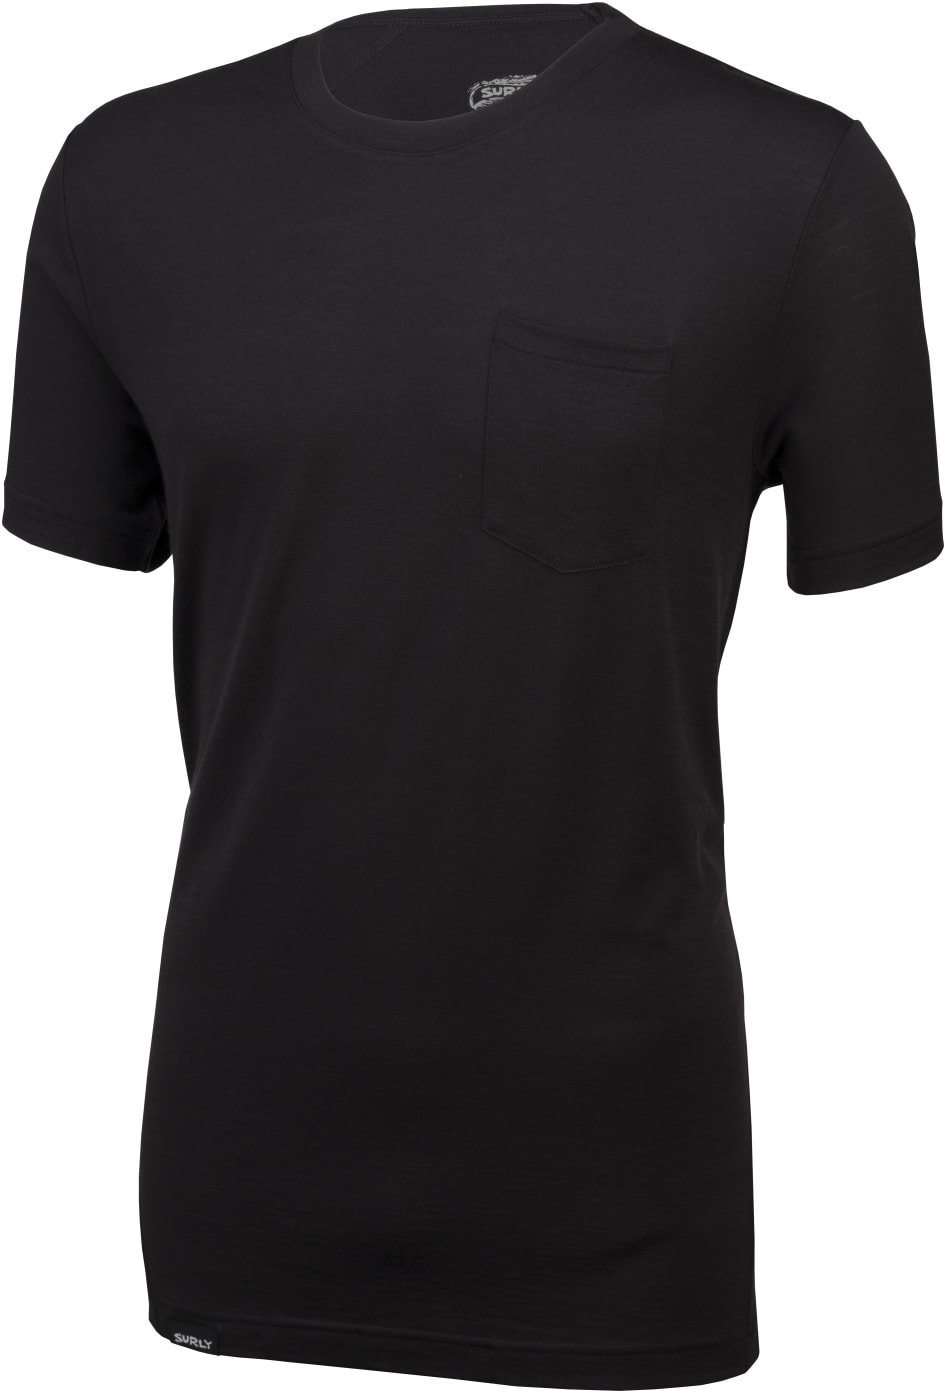 Surly Wool Pocket T - black - front view